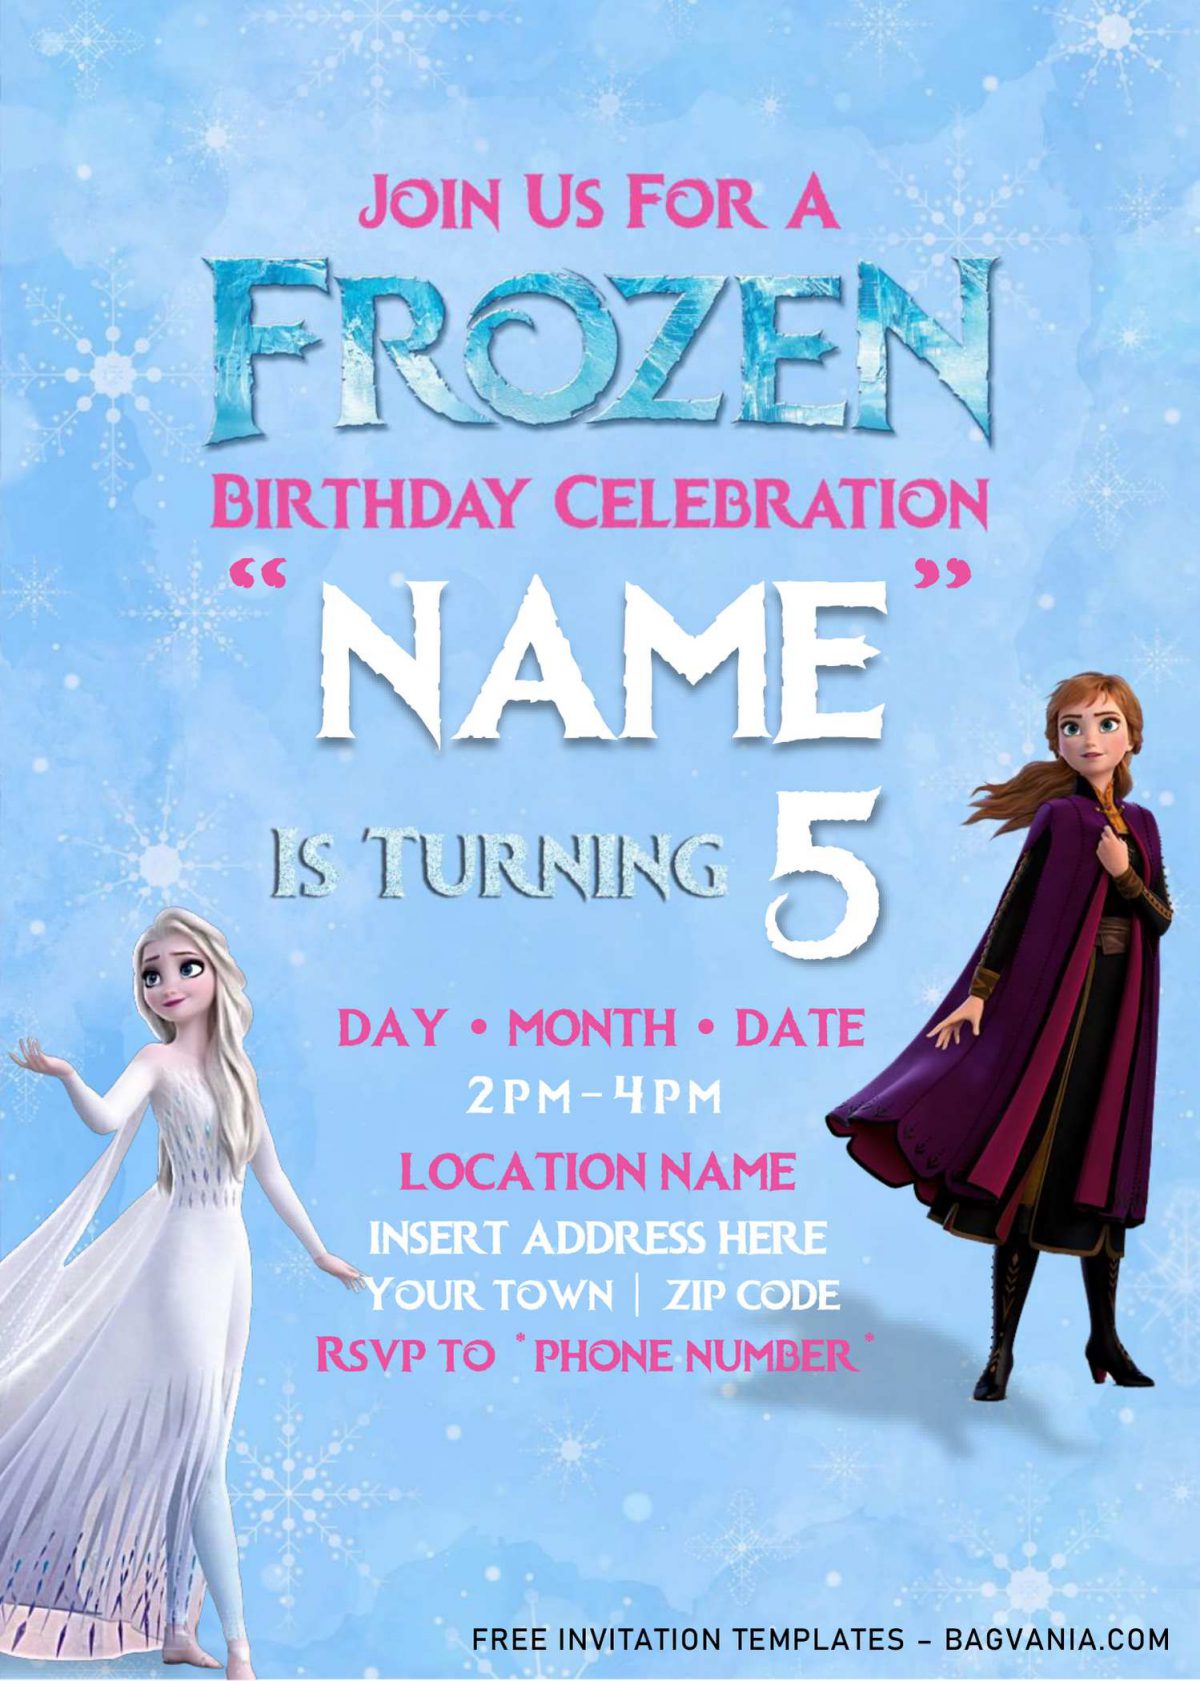 Free Frozen Birthday Invitation Templates For Word and has Elsa dressing in stunning white dress